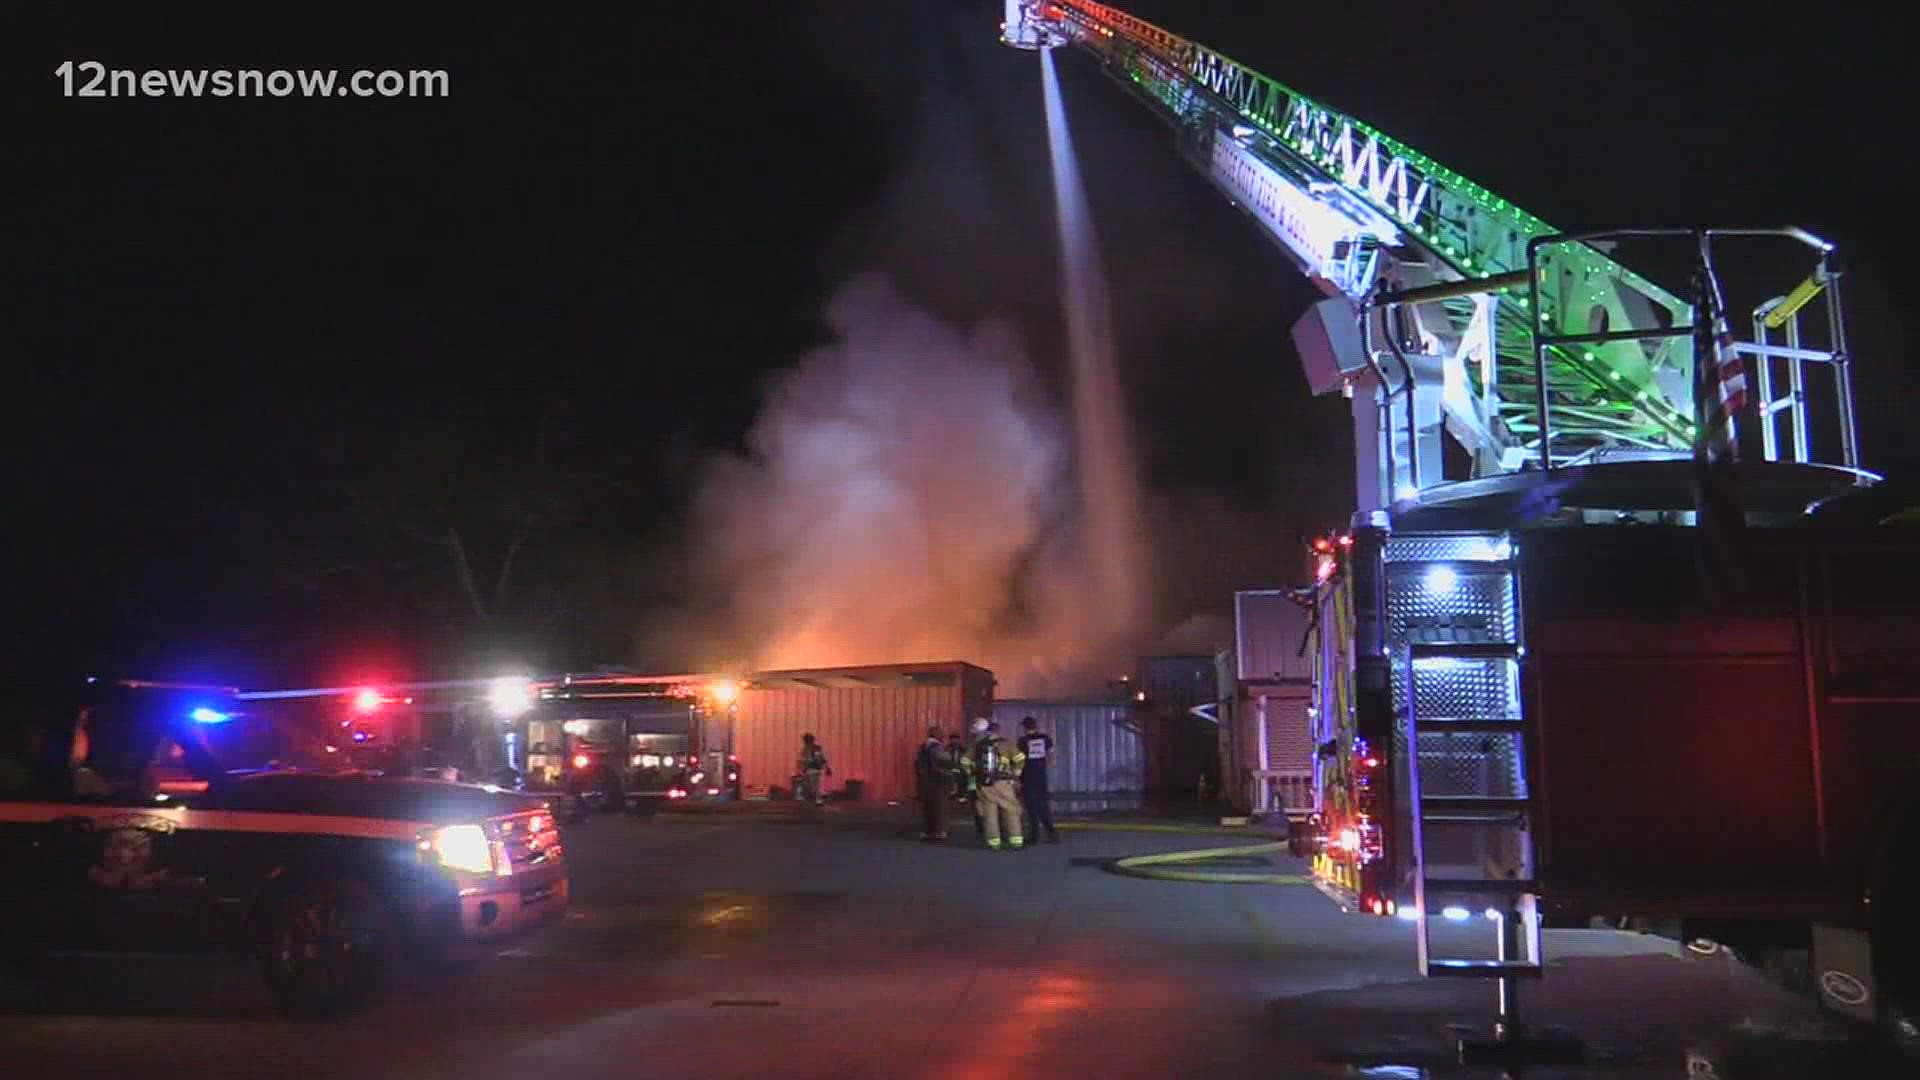 A fire broke out at the Roberts Meat Market in Pinehurst.